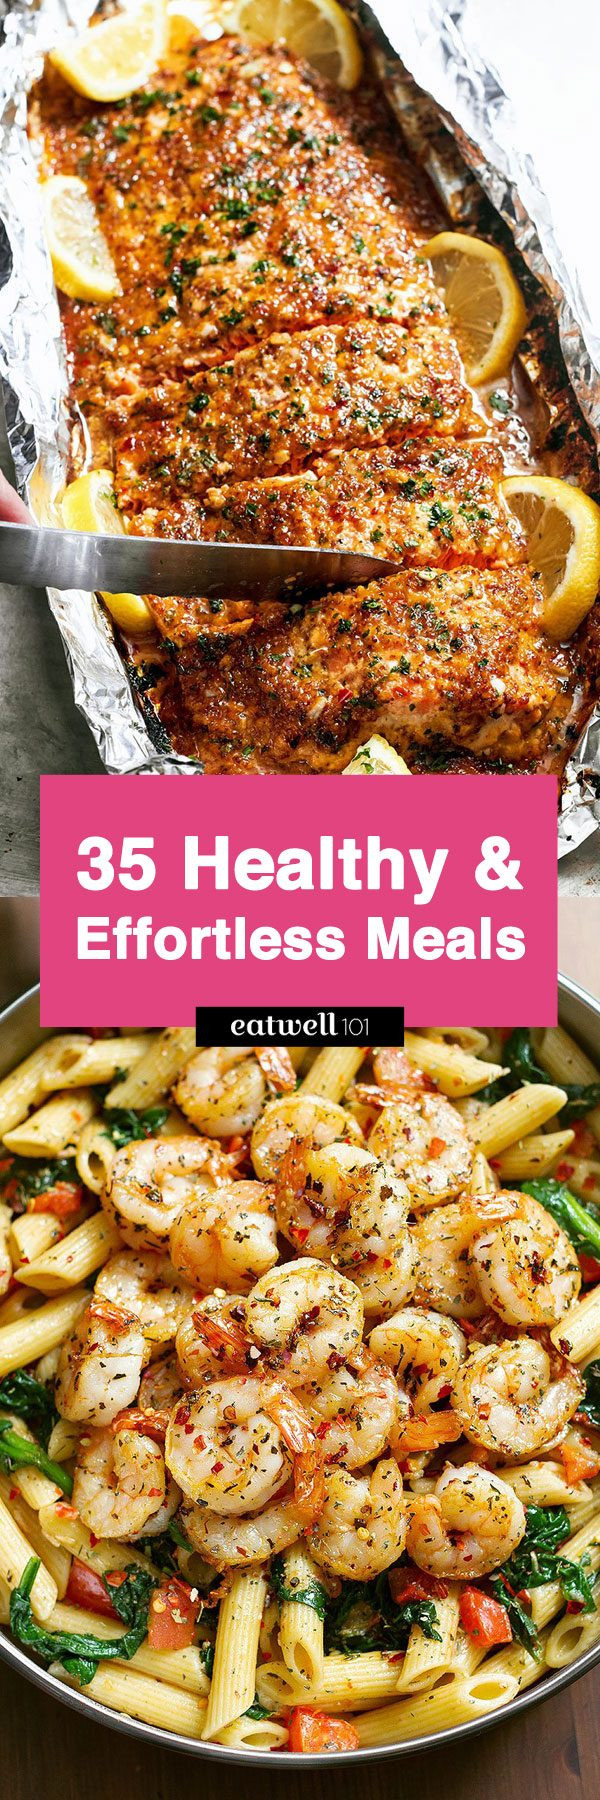 Easy Dinners Healthy
 43 Low Effort and Healthy Dinner Recipes — Eatwell101